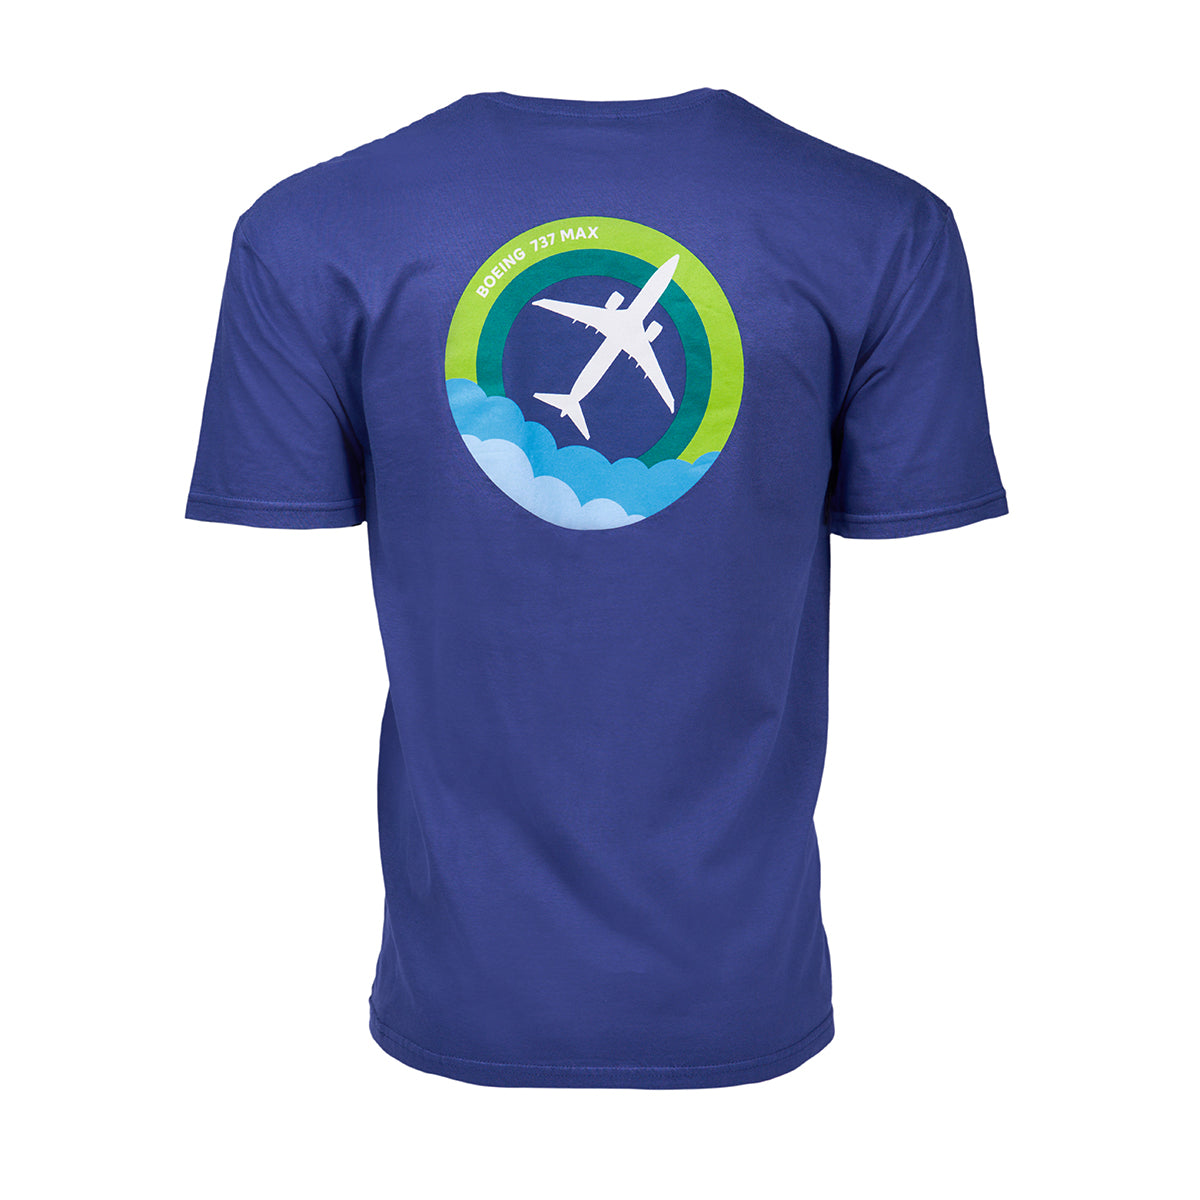 Full product image of the back side of the t-shirt in blue color.  Showing the Skyward graphic of the Boeing 737 MAX.